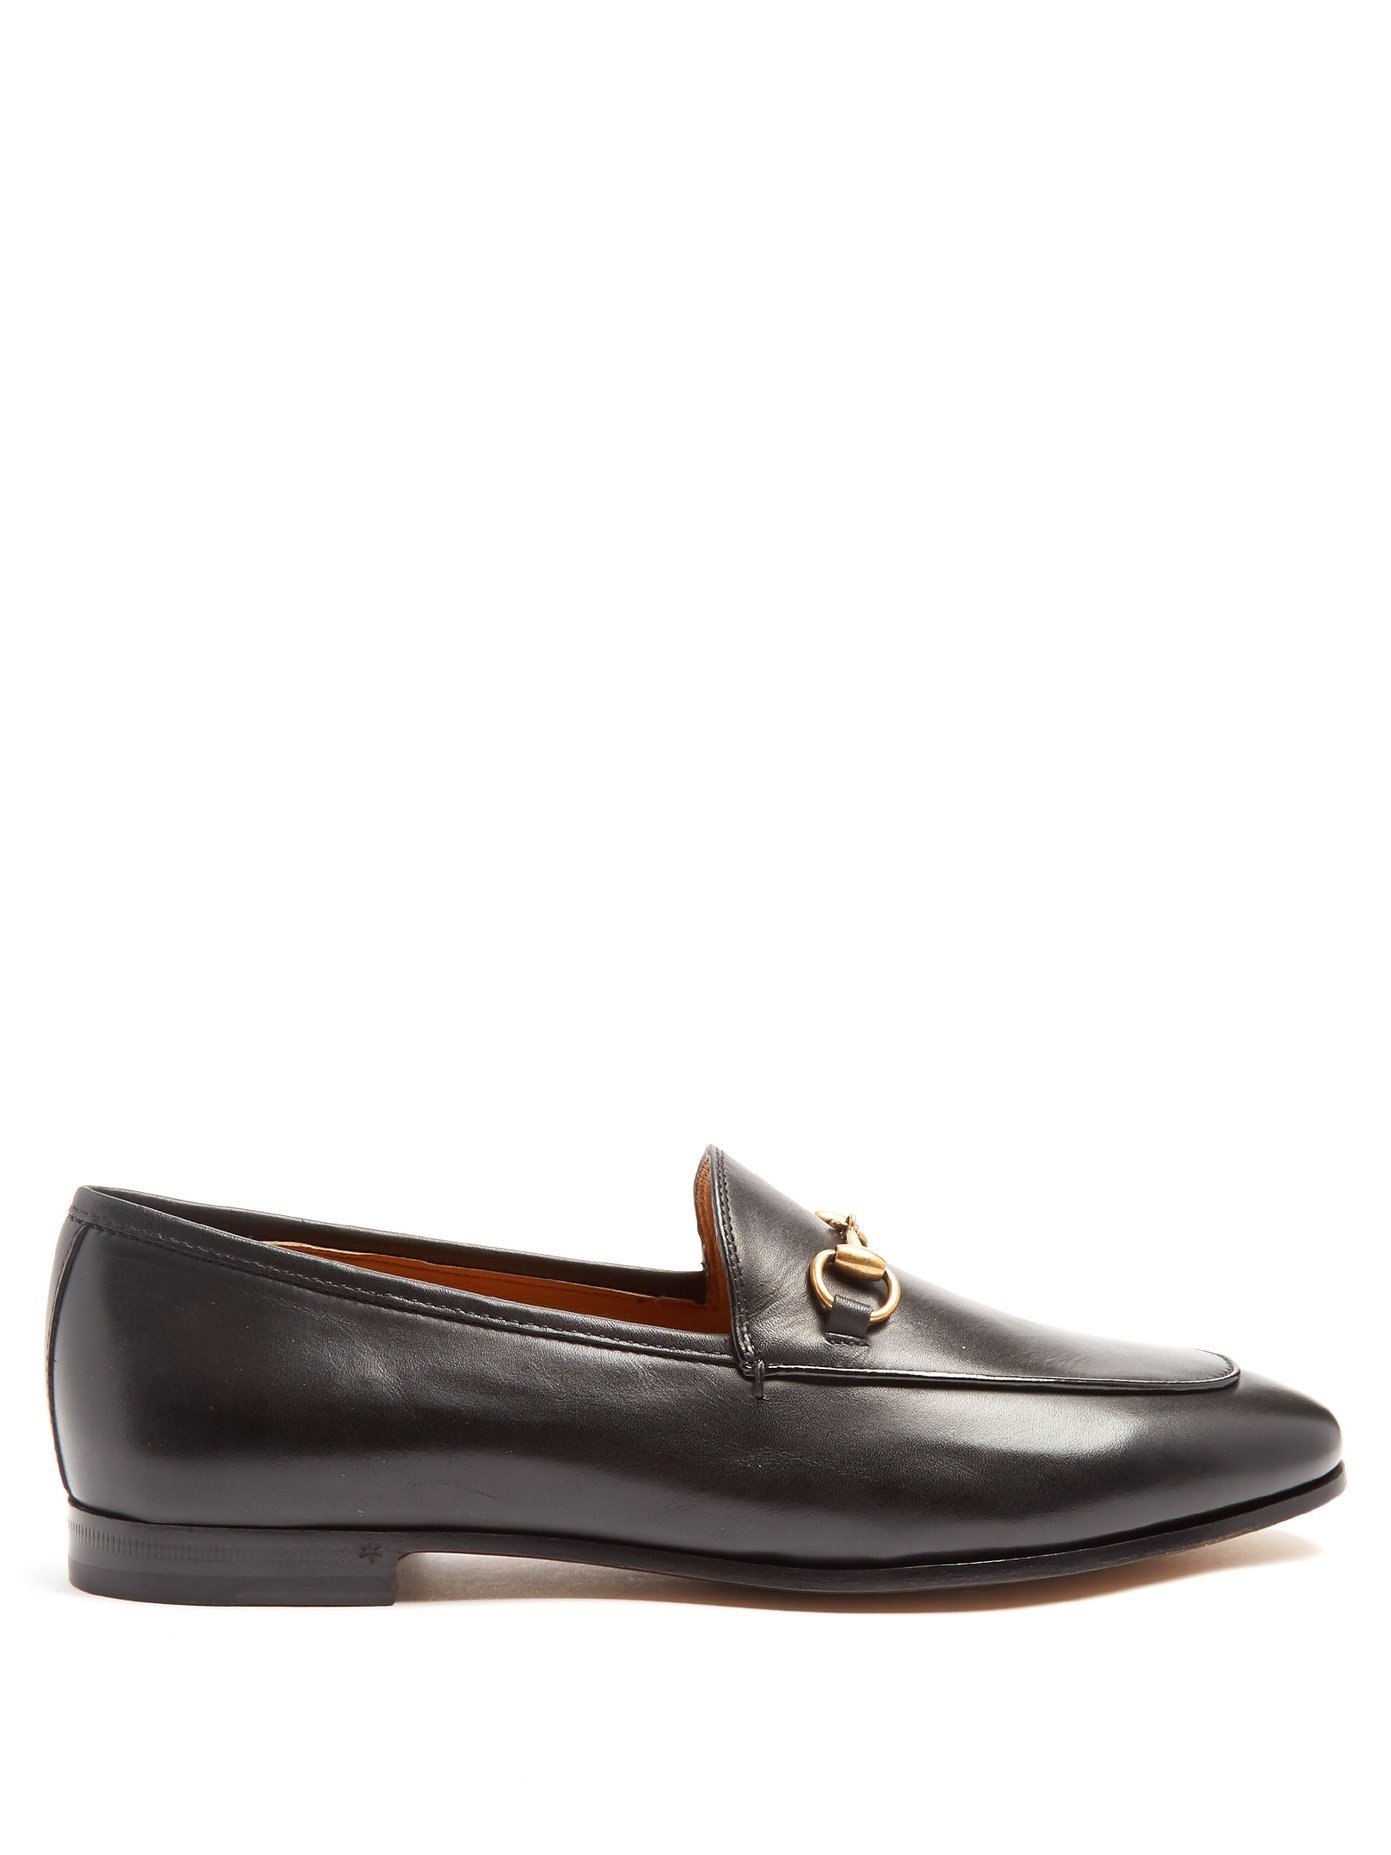 classic gucci loafers